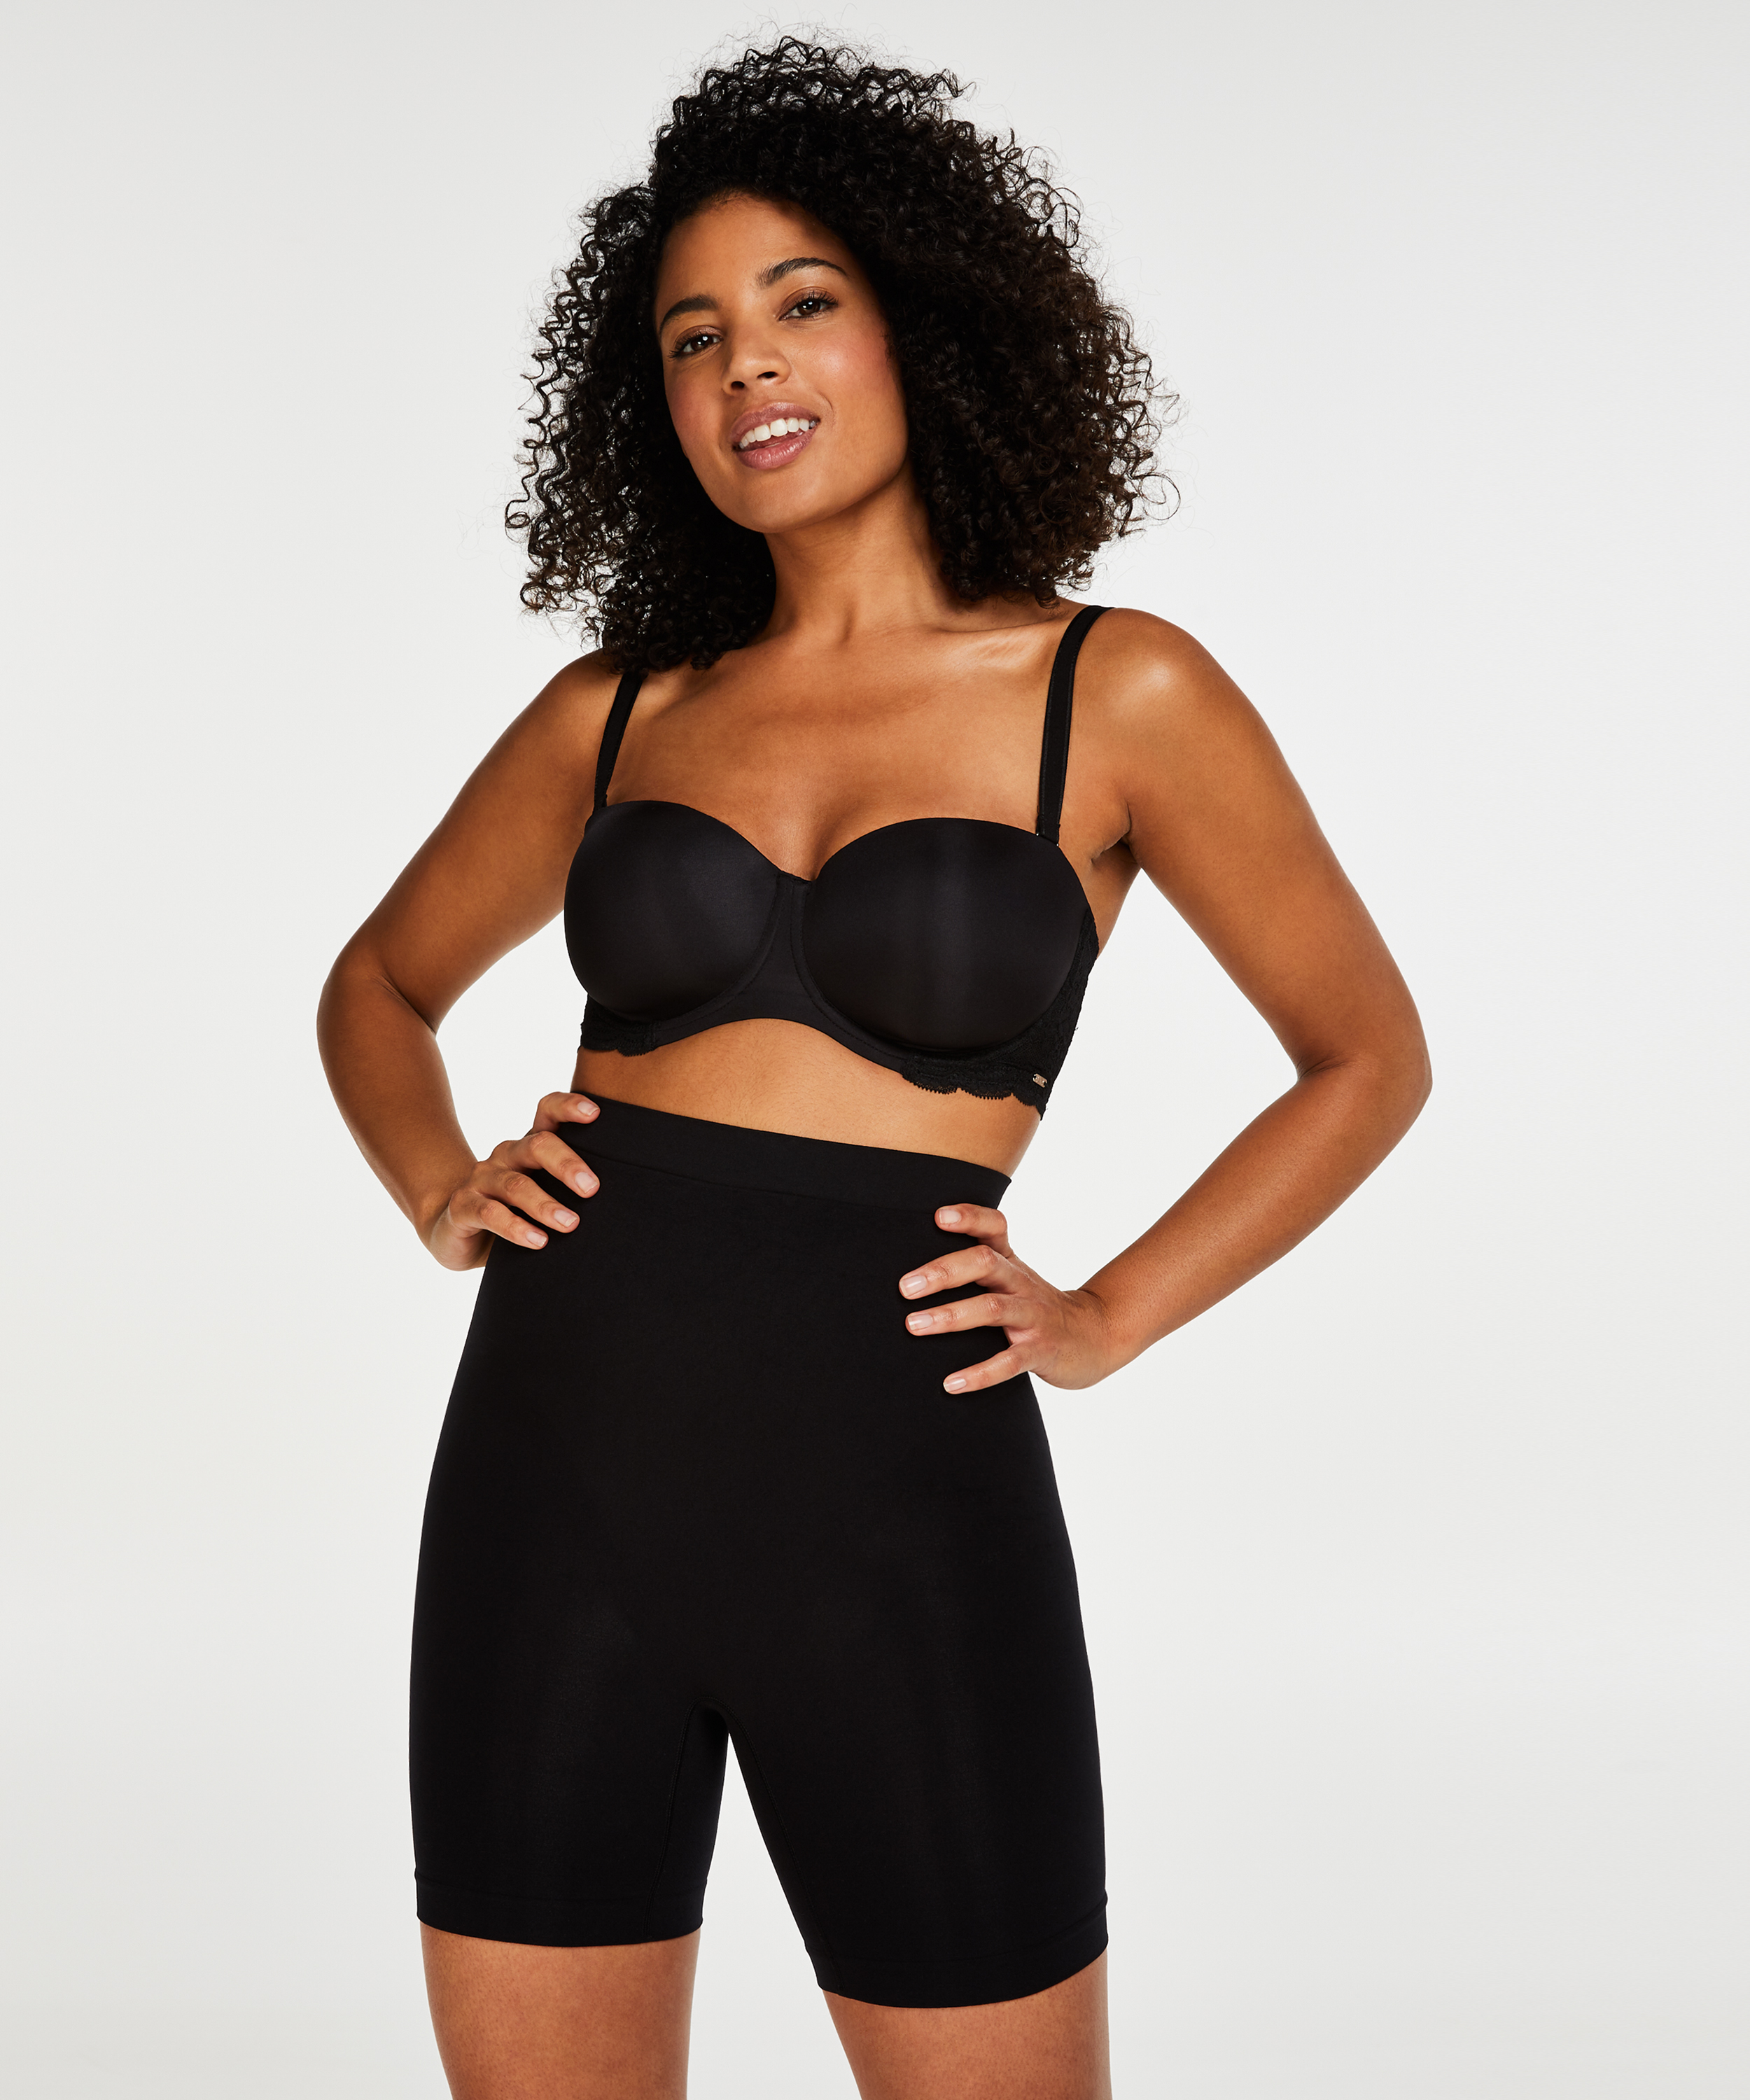 map constante Snel Firming high waisted thigh slimmer - Level 2 for €22.99 - Shapewear -  Hunkemöller